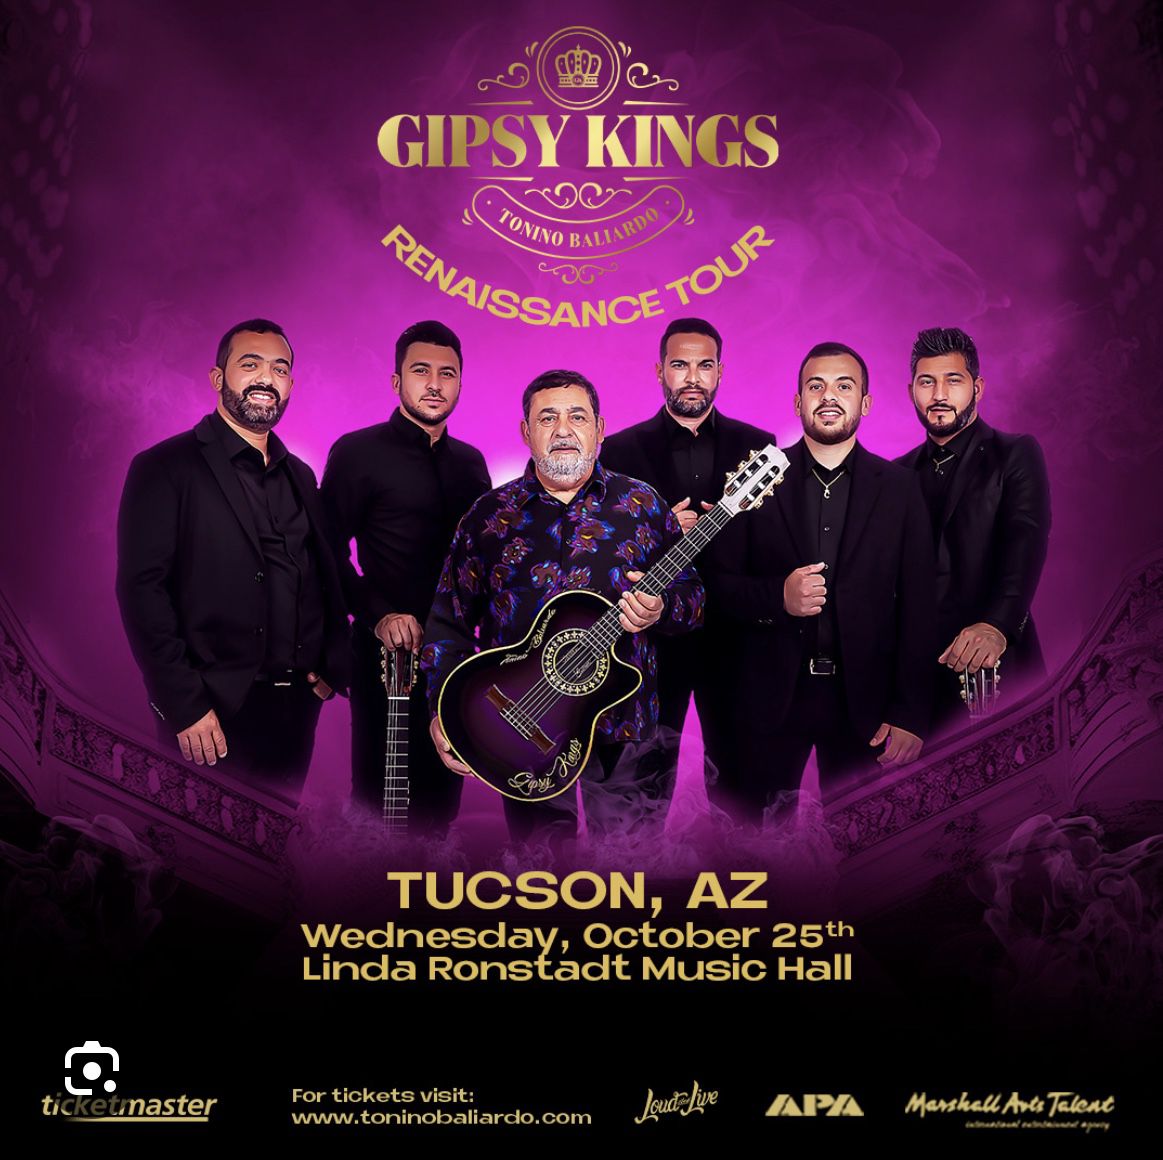 Gipsy kings In Tucson! 3rd Row Seats! 2 Tickets Available 